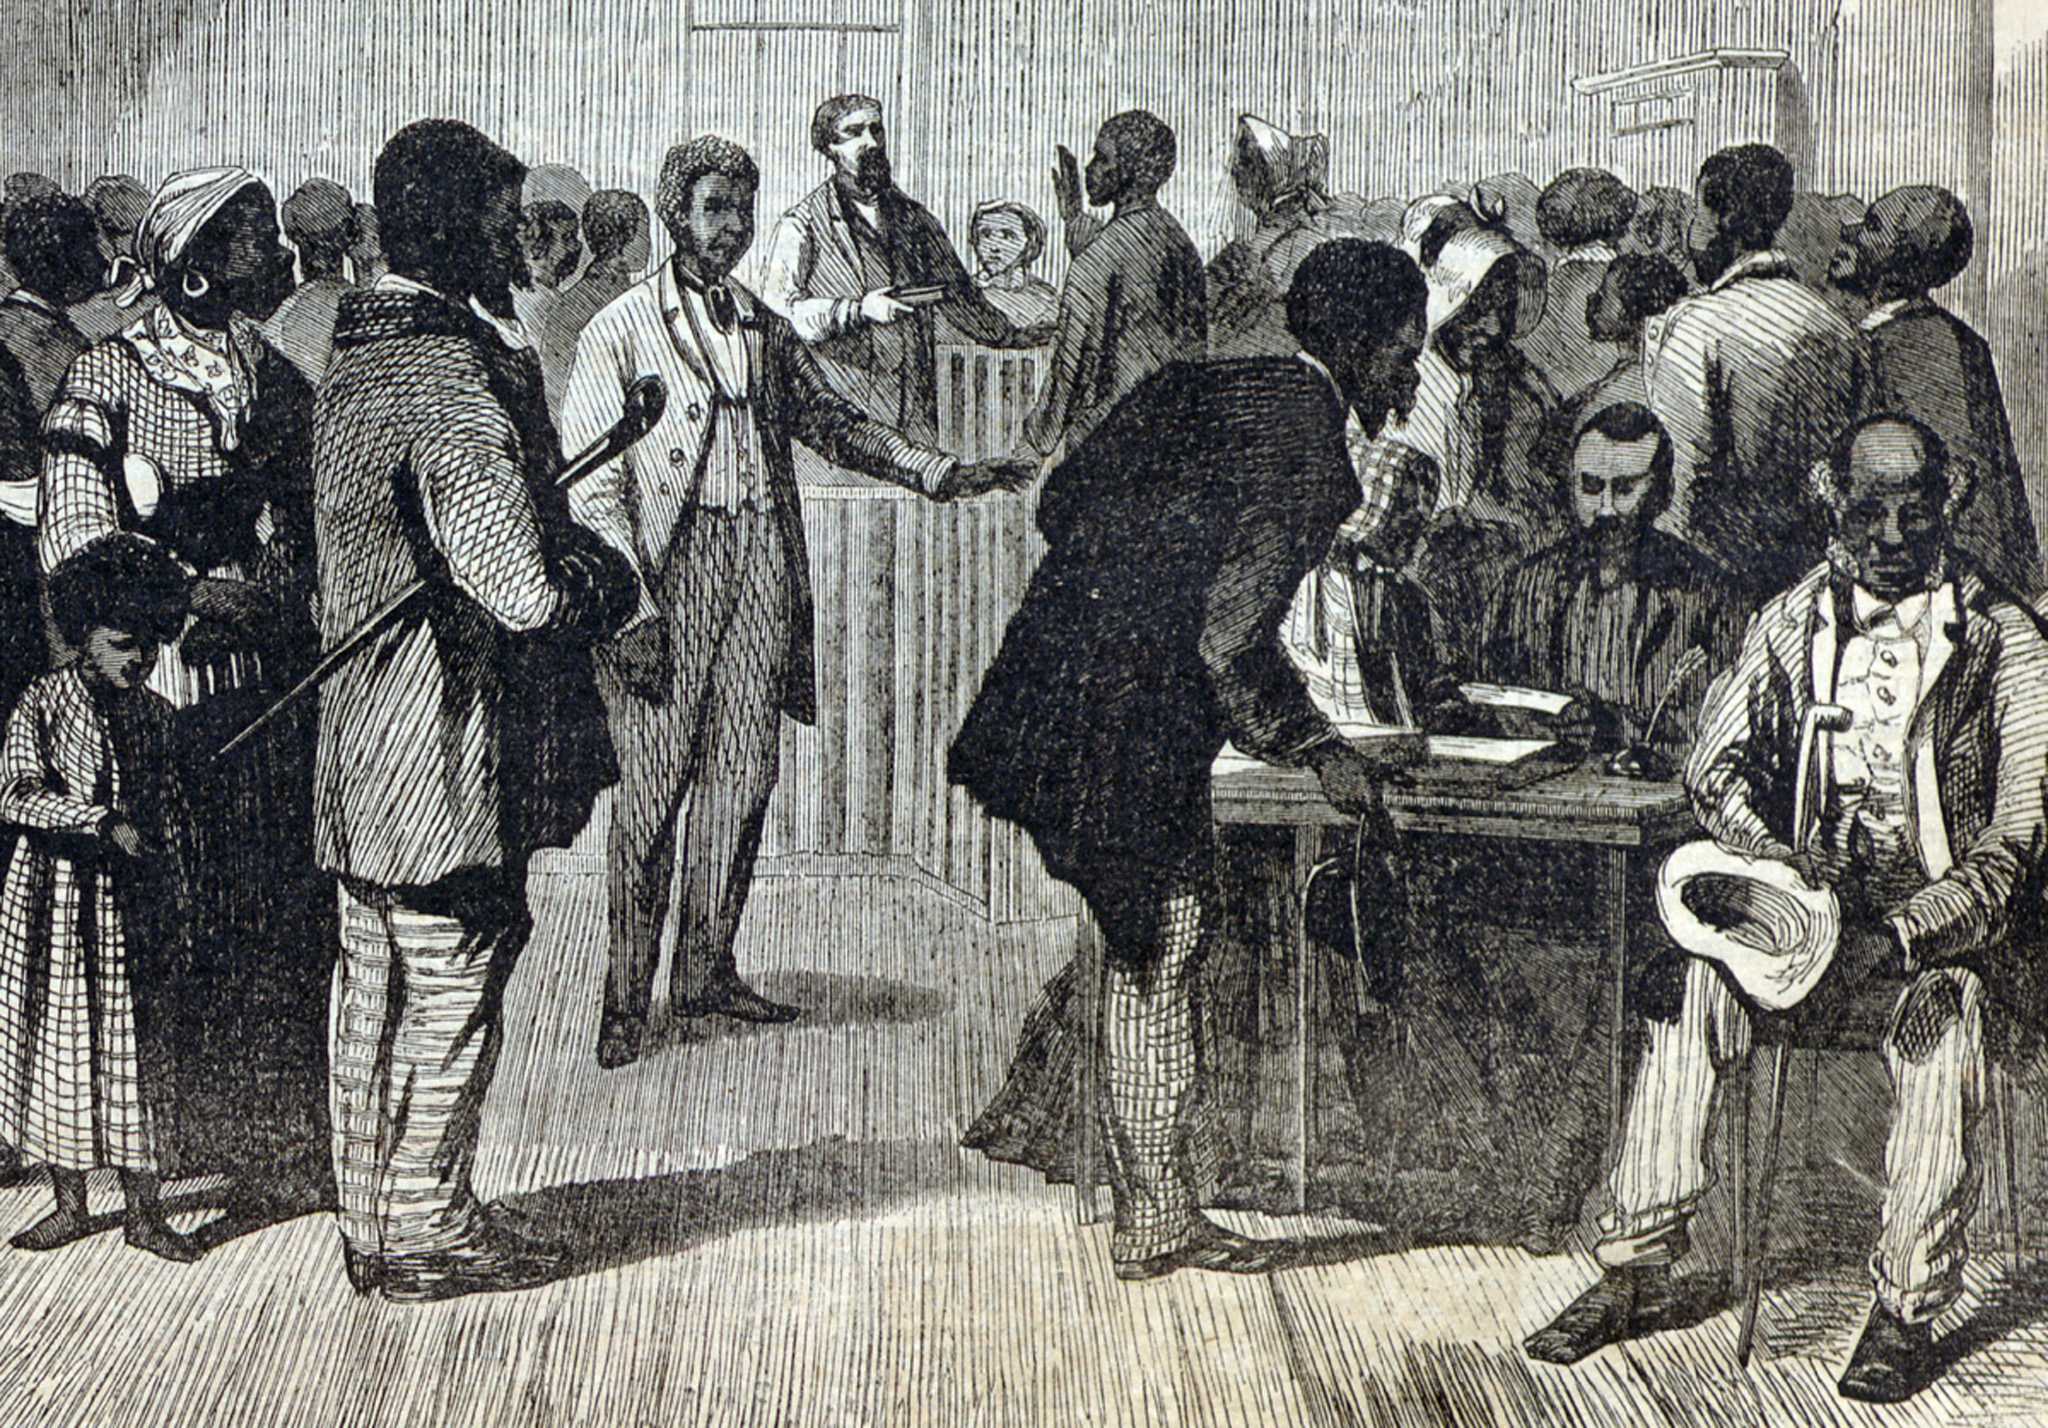 Engraving depicting court in session at Freedmen's Bureau offices